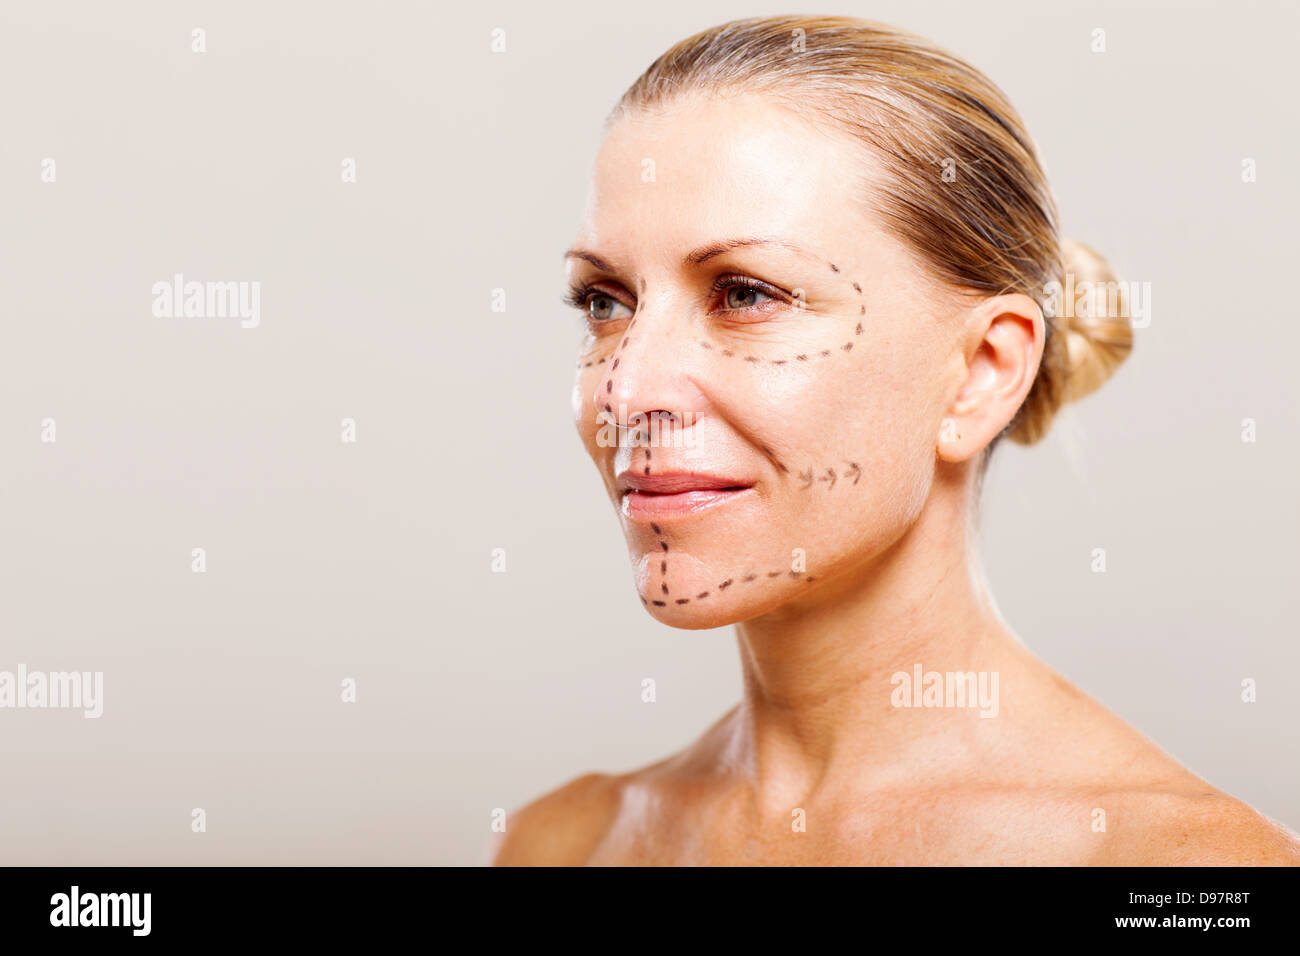 middle aged woman getting ready for plastic surgery Stock Photo